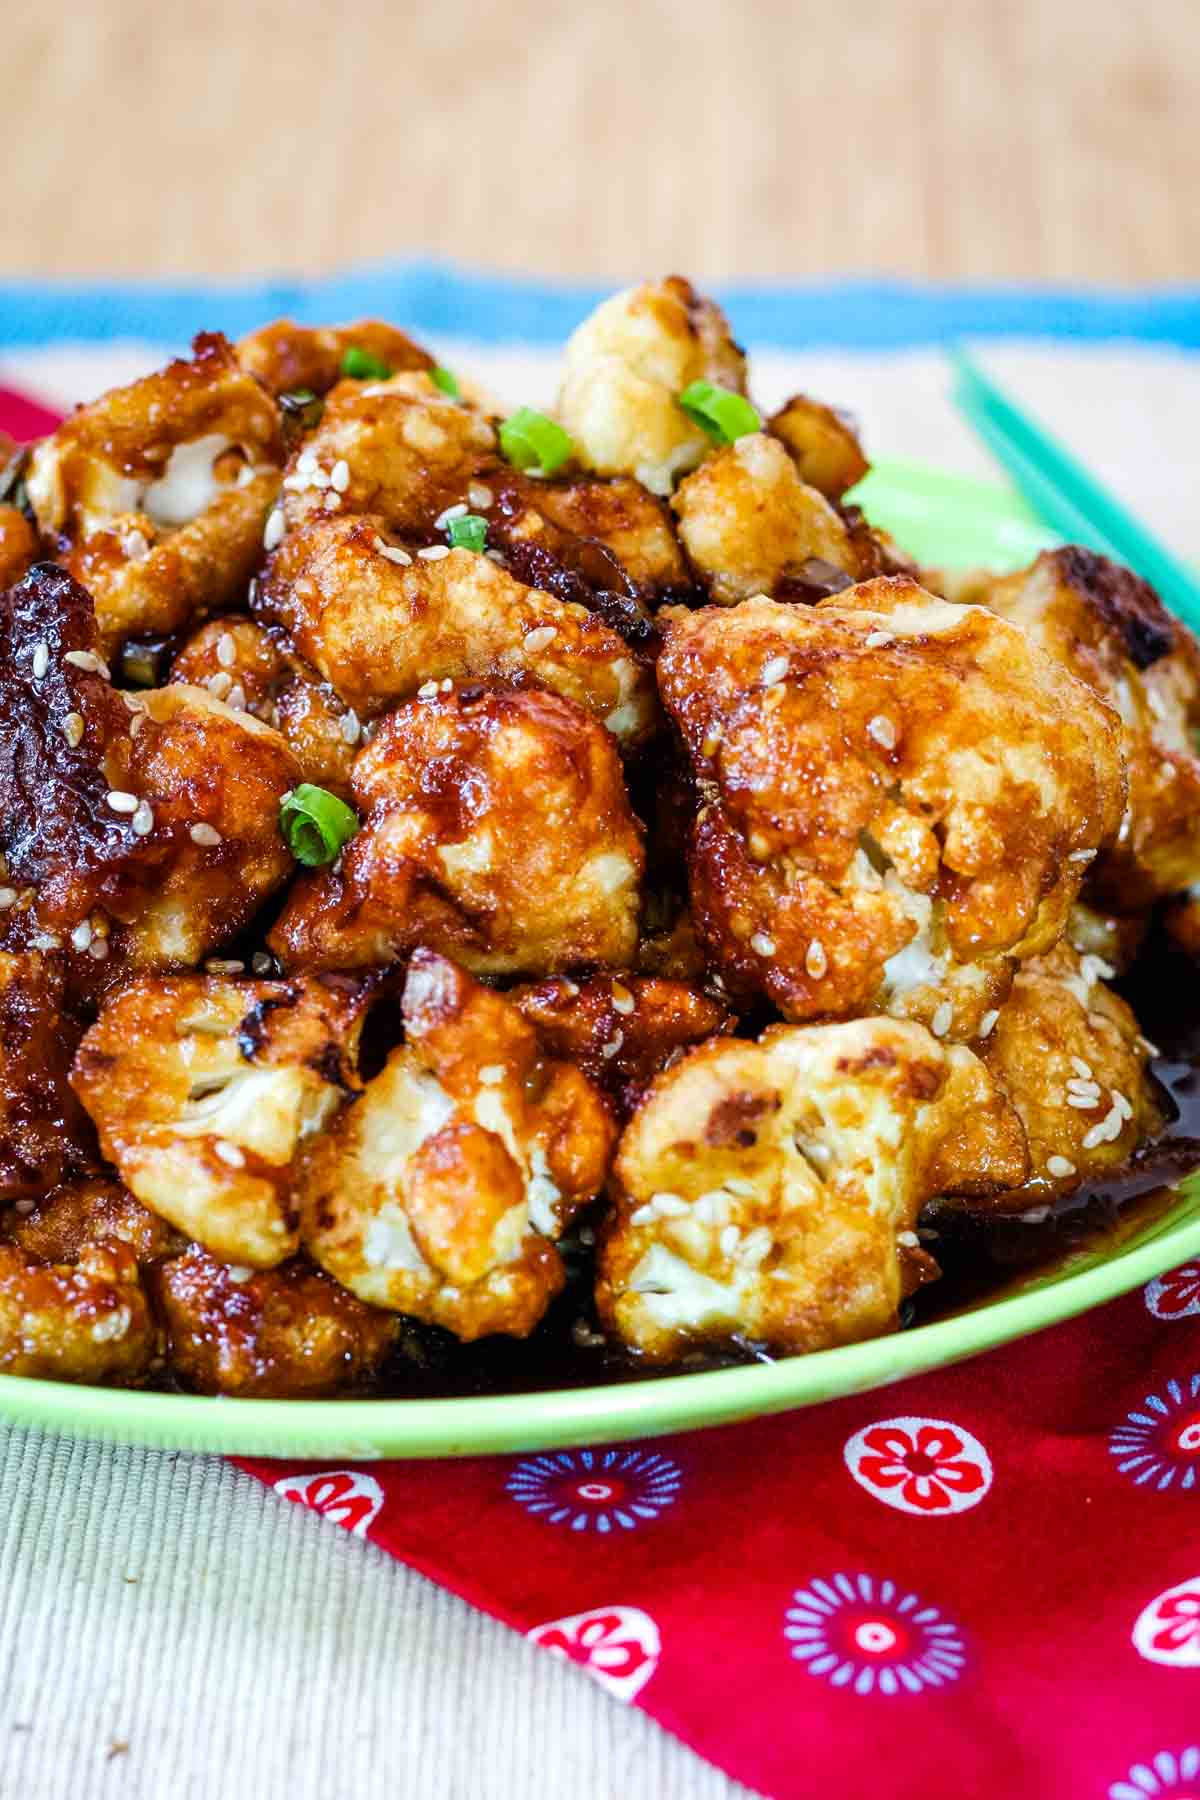 Looking from the side at a pile of cauliflower wings with a dark brown glaze and sesame seeds on a plate.